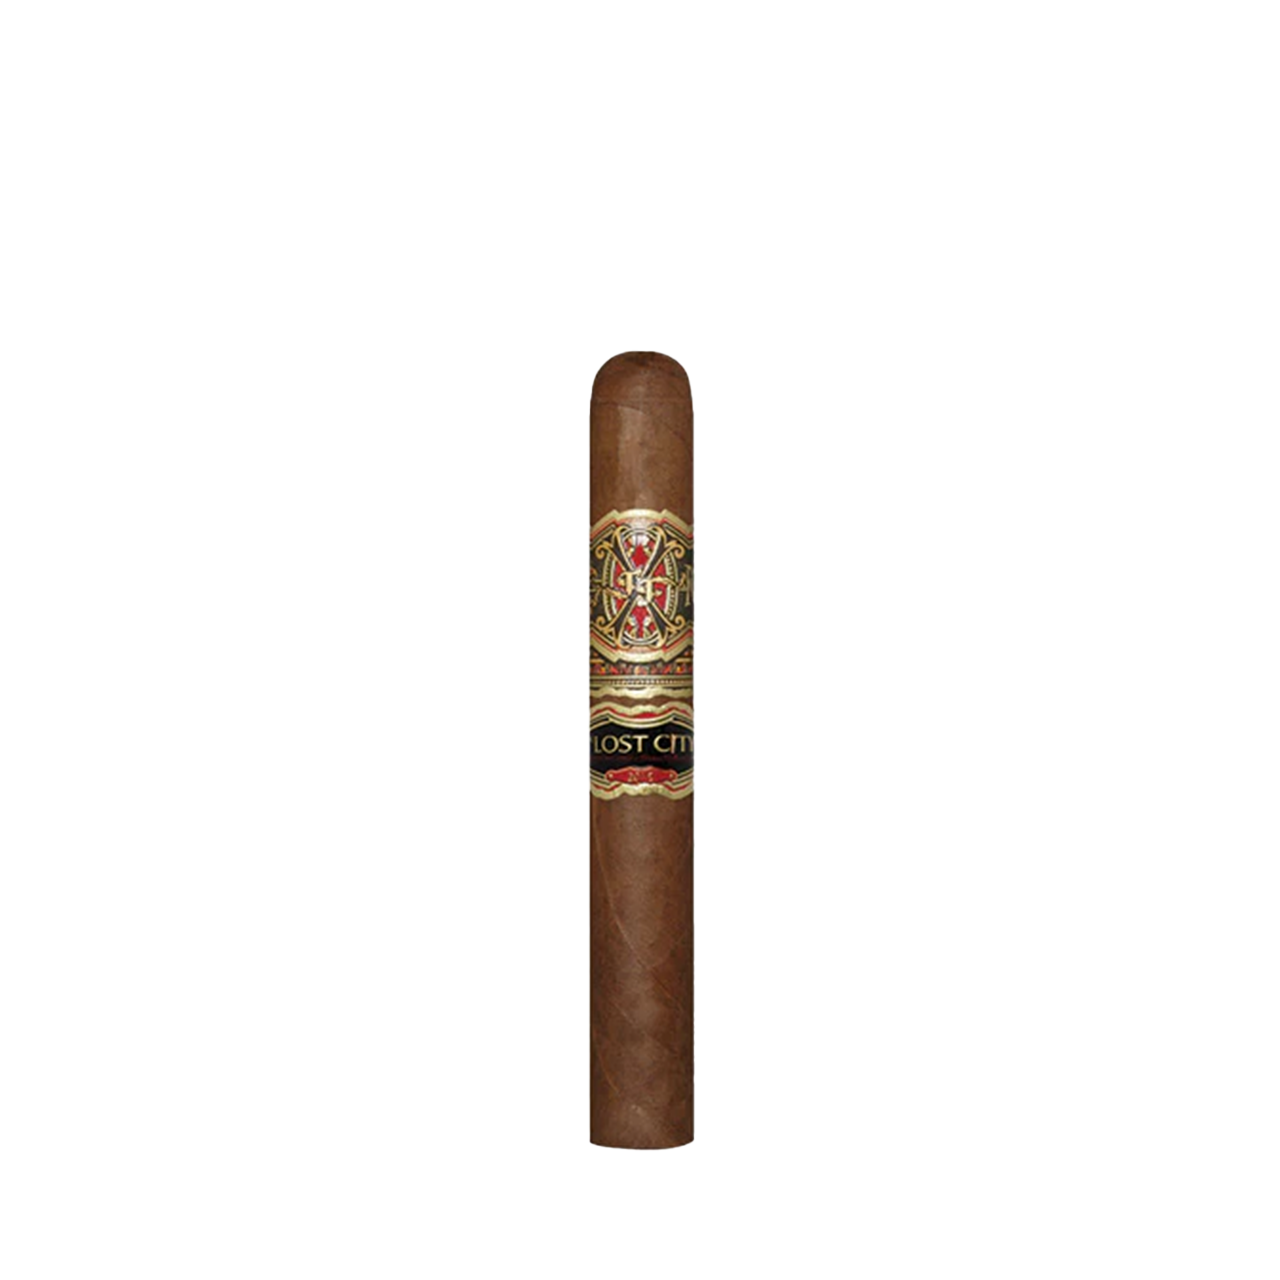 Lost City OpusX Double Robusto